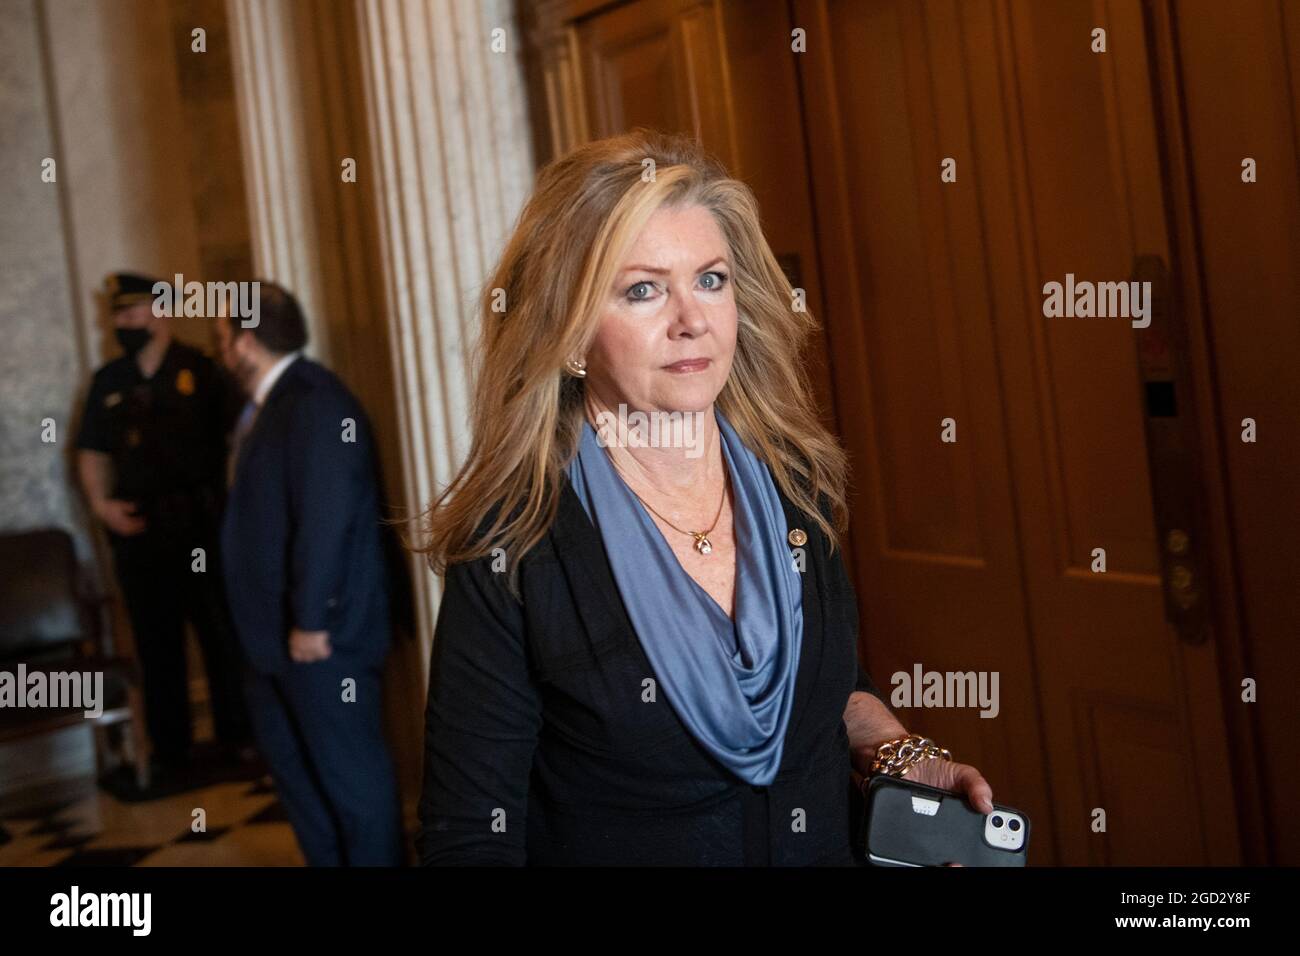 Washington, United States Of America. 10th Aug, 2021. United States Senator Marsha Blackburn (Republican of Tennessee) departs the Senate chamber during a vote at the US Capitol in Washington, DC, Tuesday, August 10, 2021. The Senate is expected to vote today on final passage of the bipartisan $1 trillion H.R. 3684, Infrastructure Investment and Jobs Act. the Credit: Rod Lamkey/CNP/Sipa USA Credit: Sipa USA/Alamy Live News Stock Photo